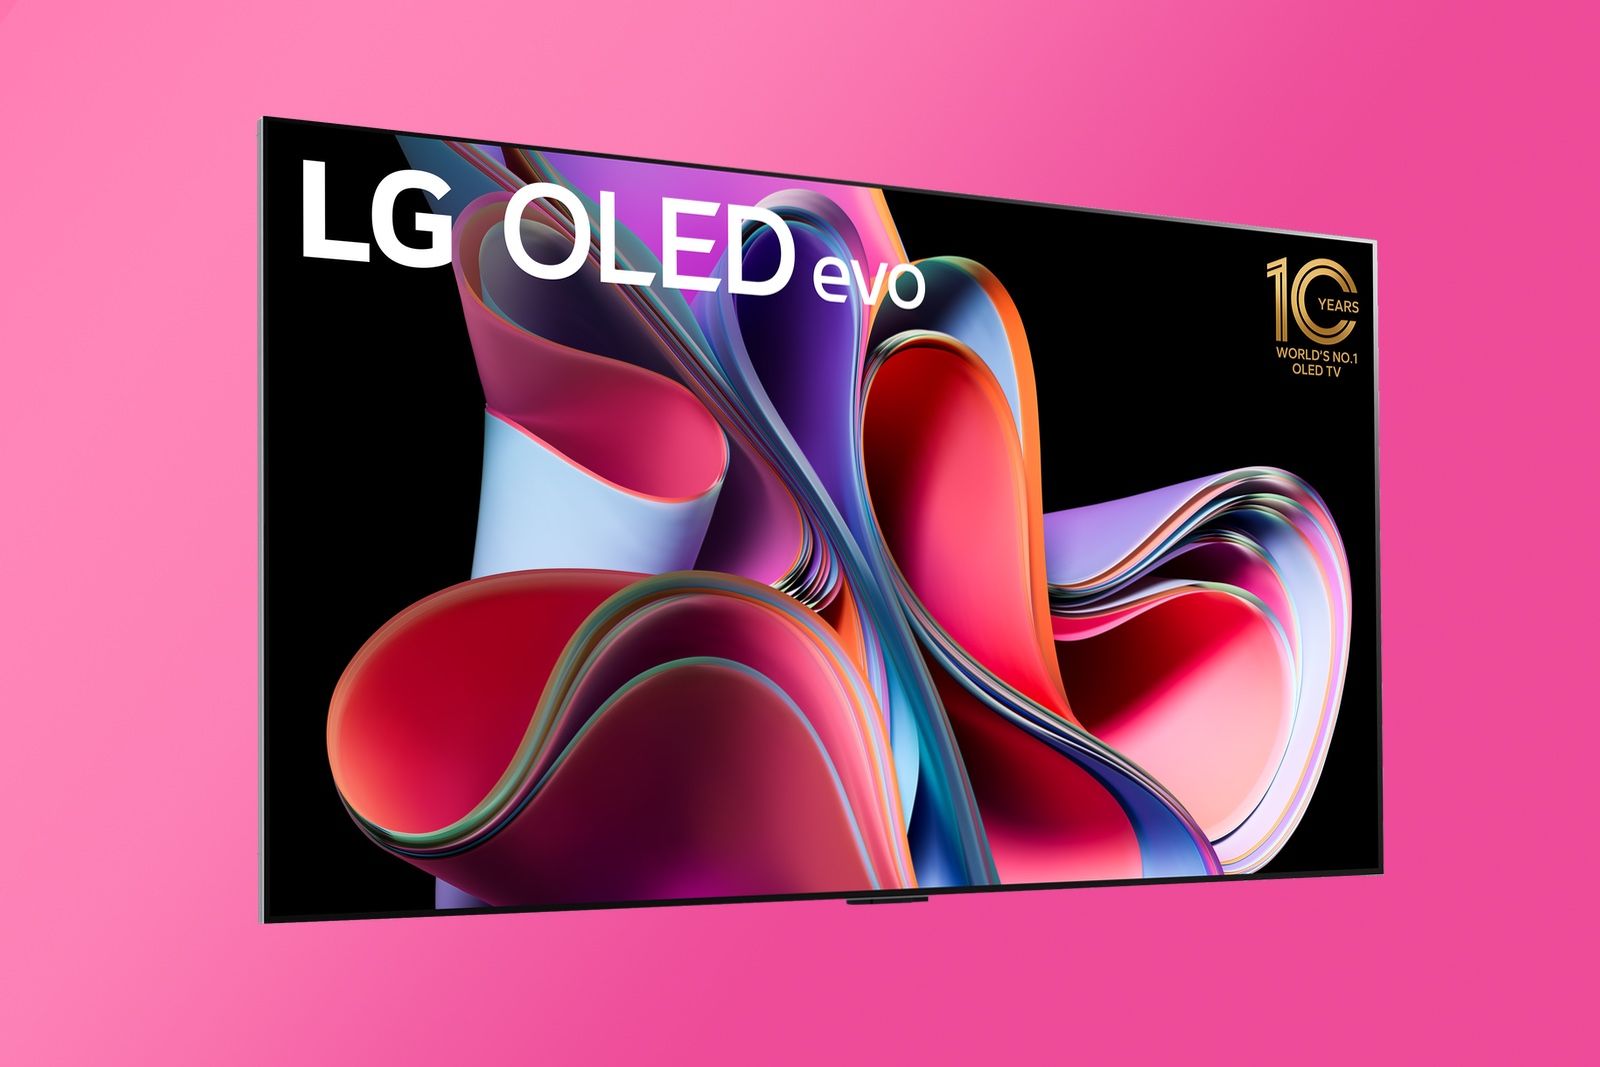 LG G3 OLED TV: everything you need to know